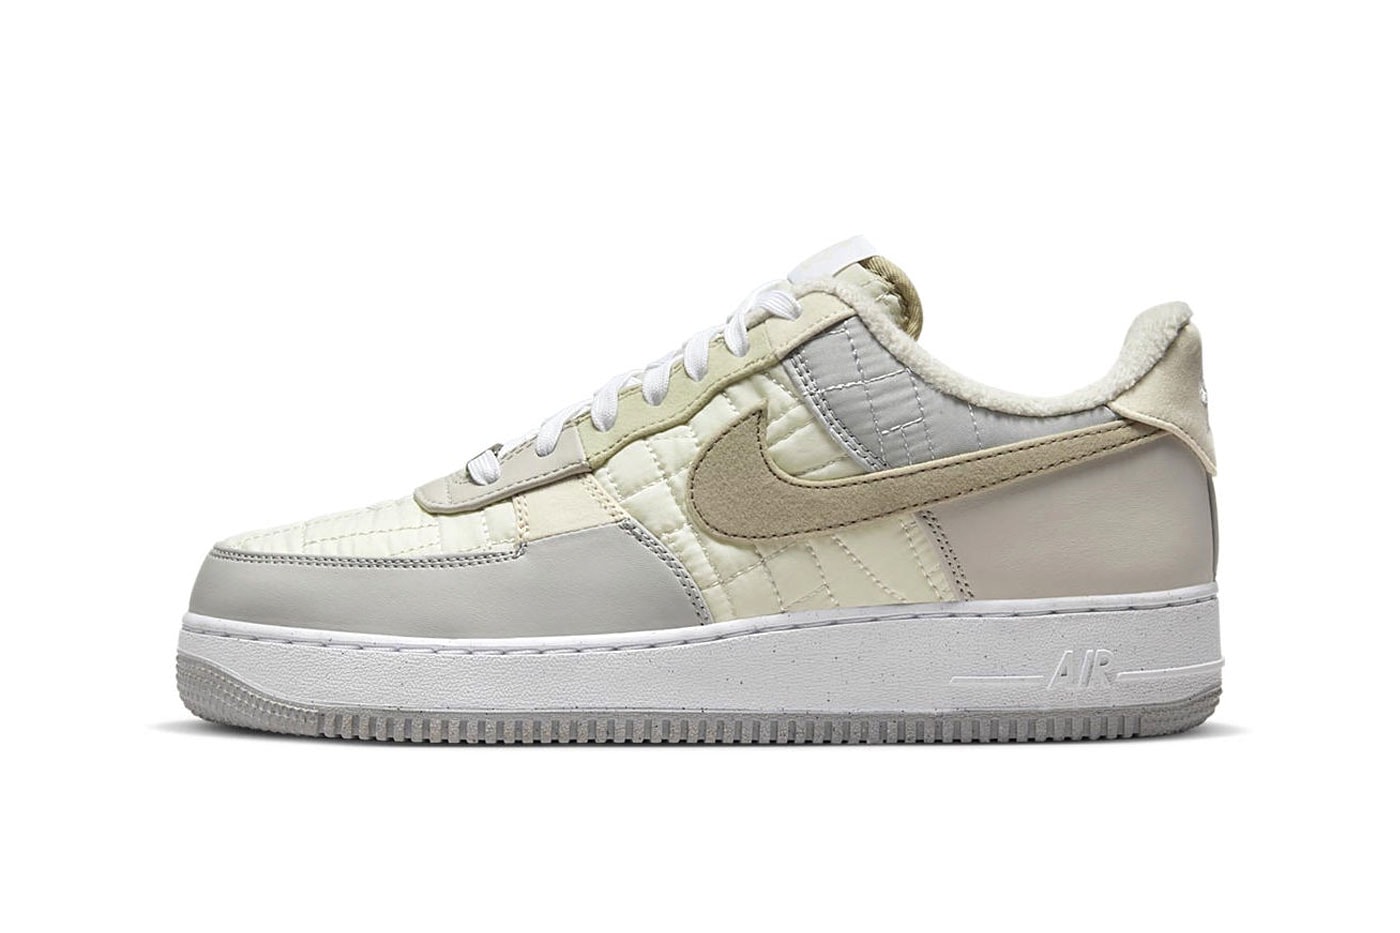 Canvas, Leather And Suede Land On This Nike Air Force 1 Low Pack •